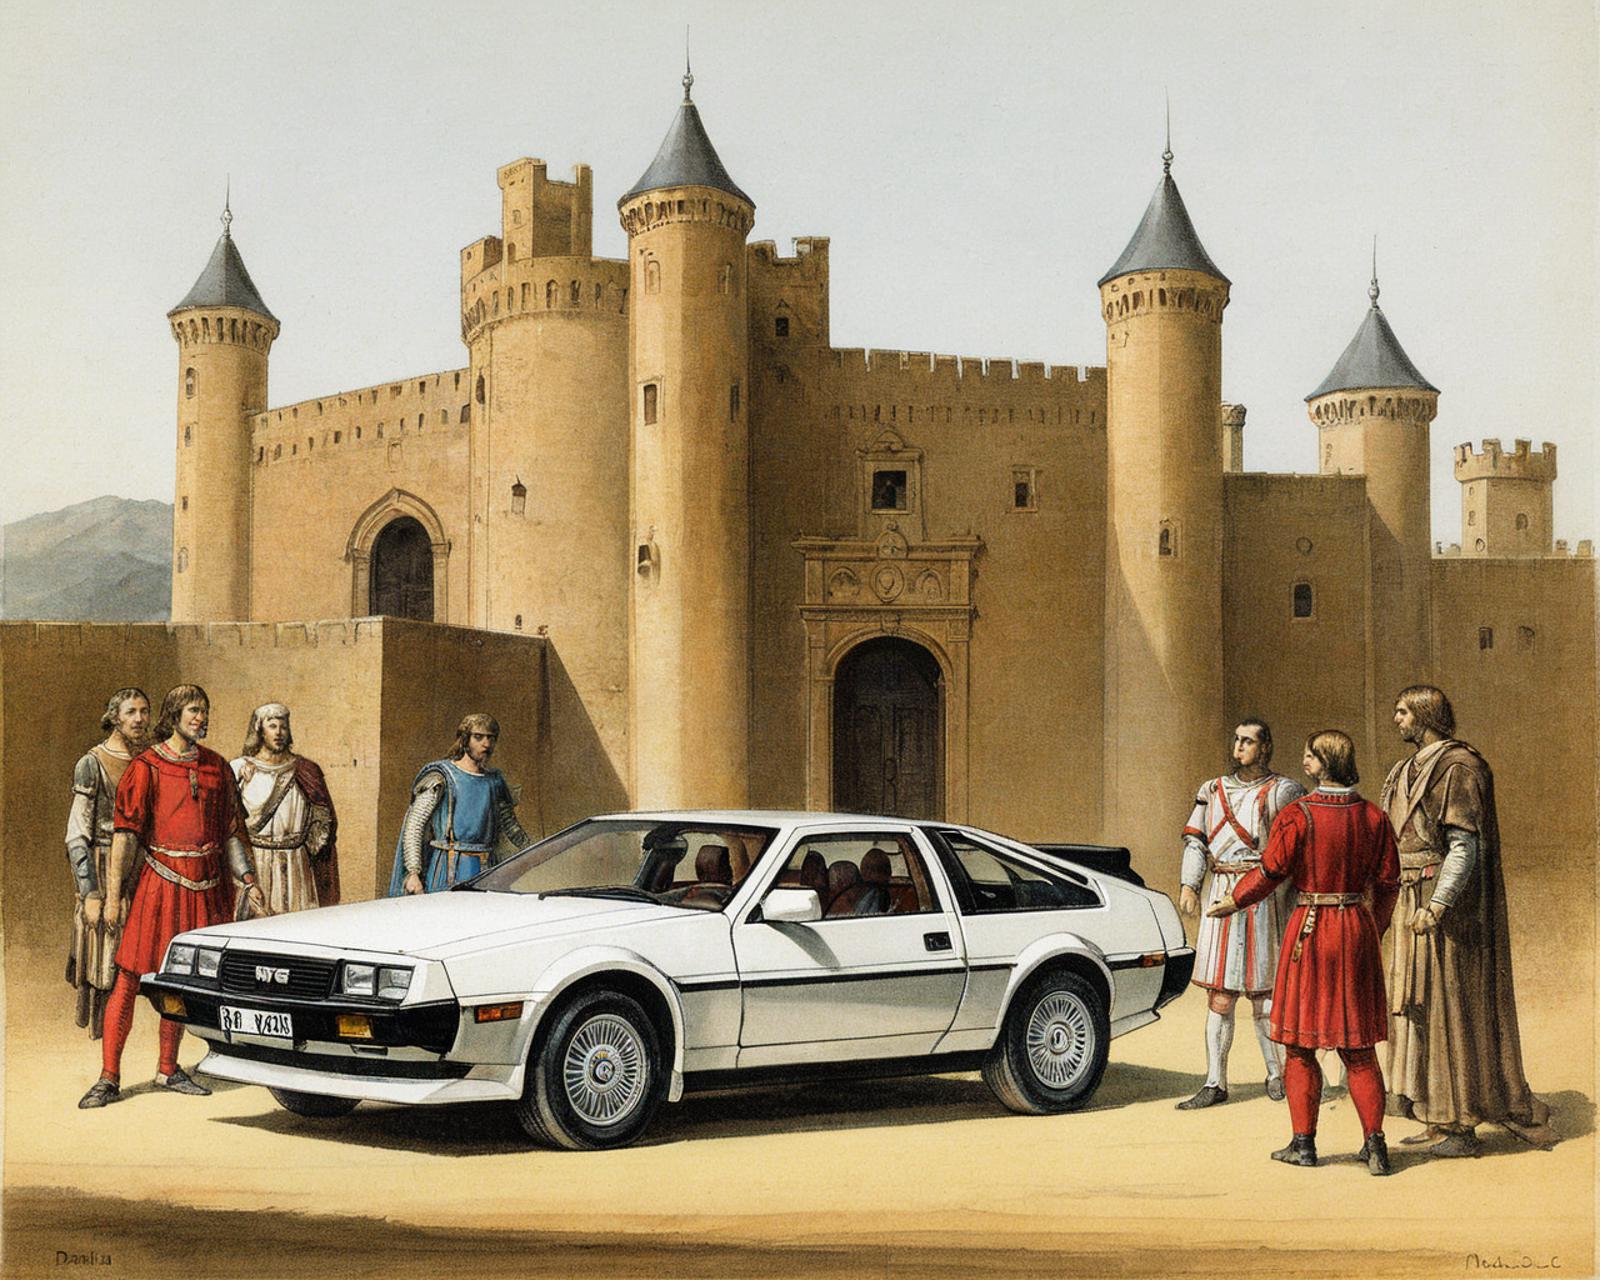 A painting of a group of people standing in front of a white car in front of a castle.